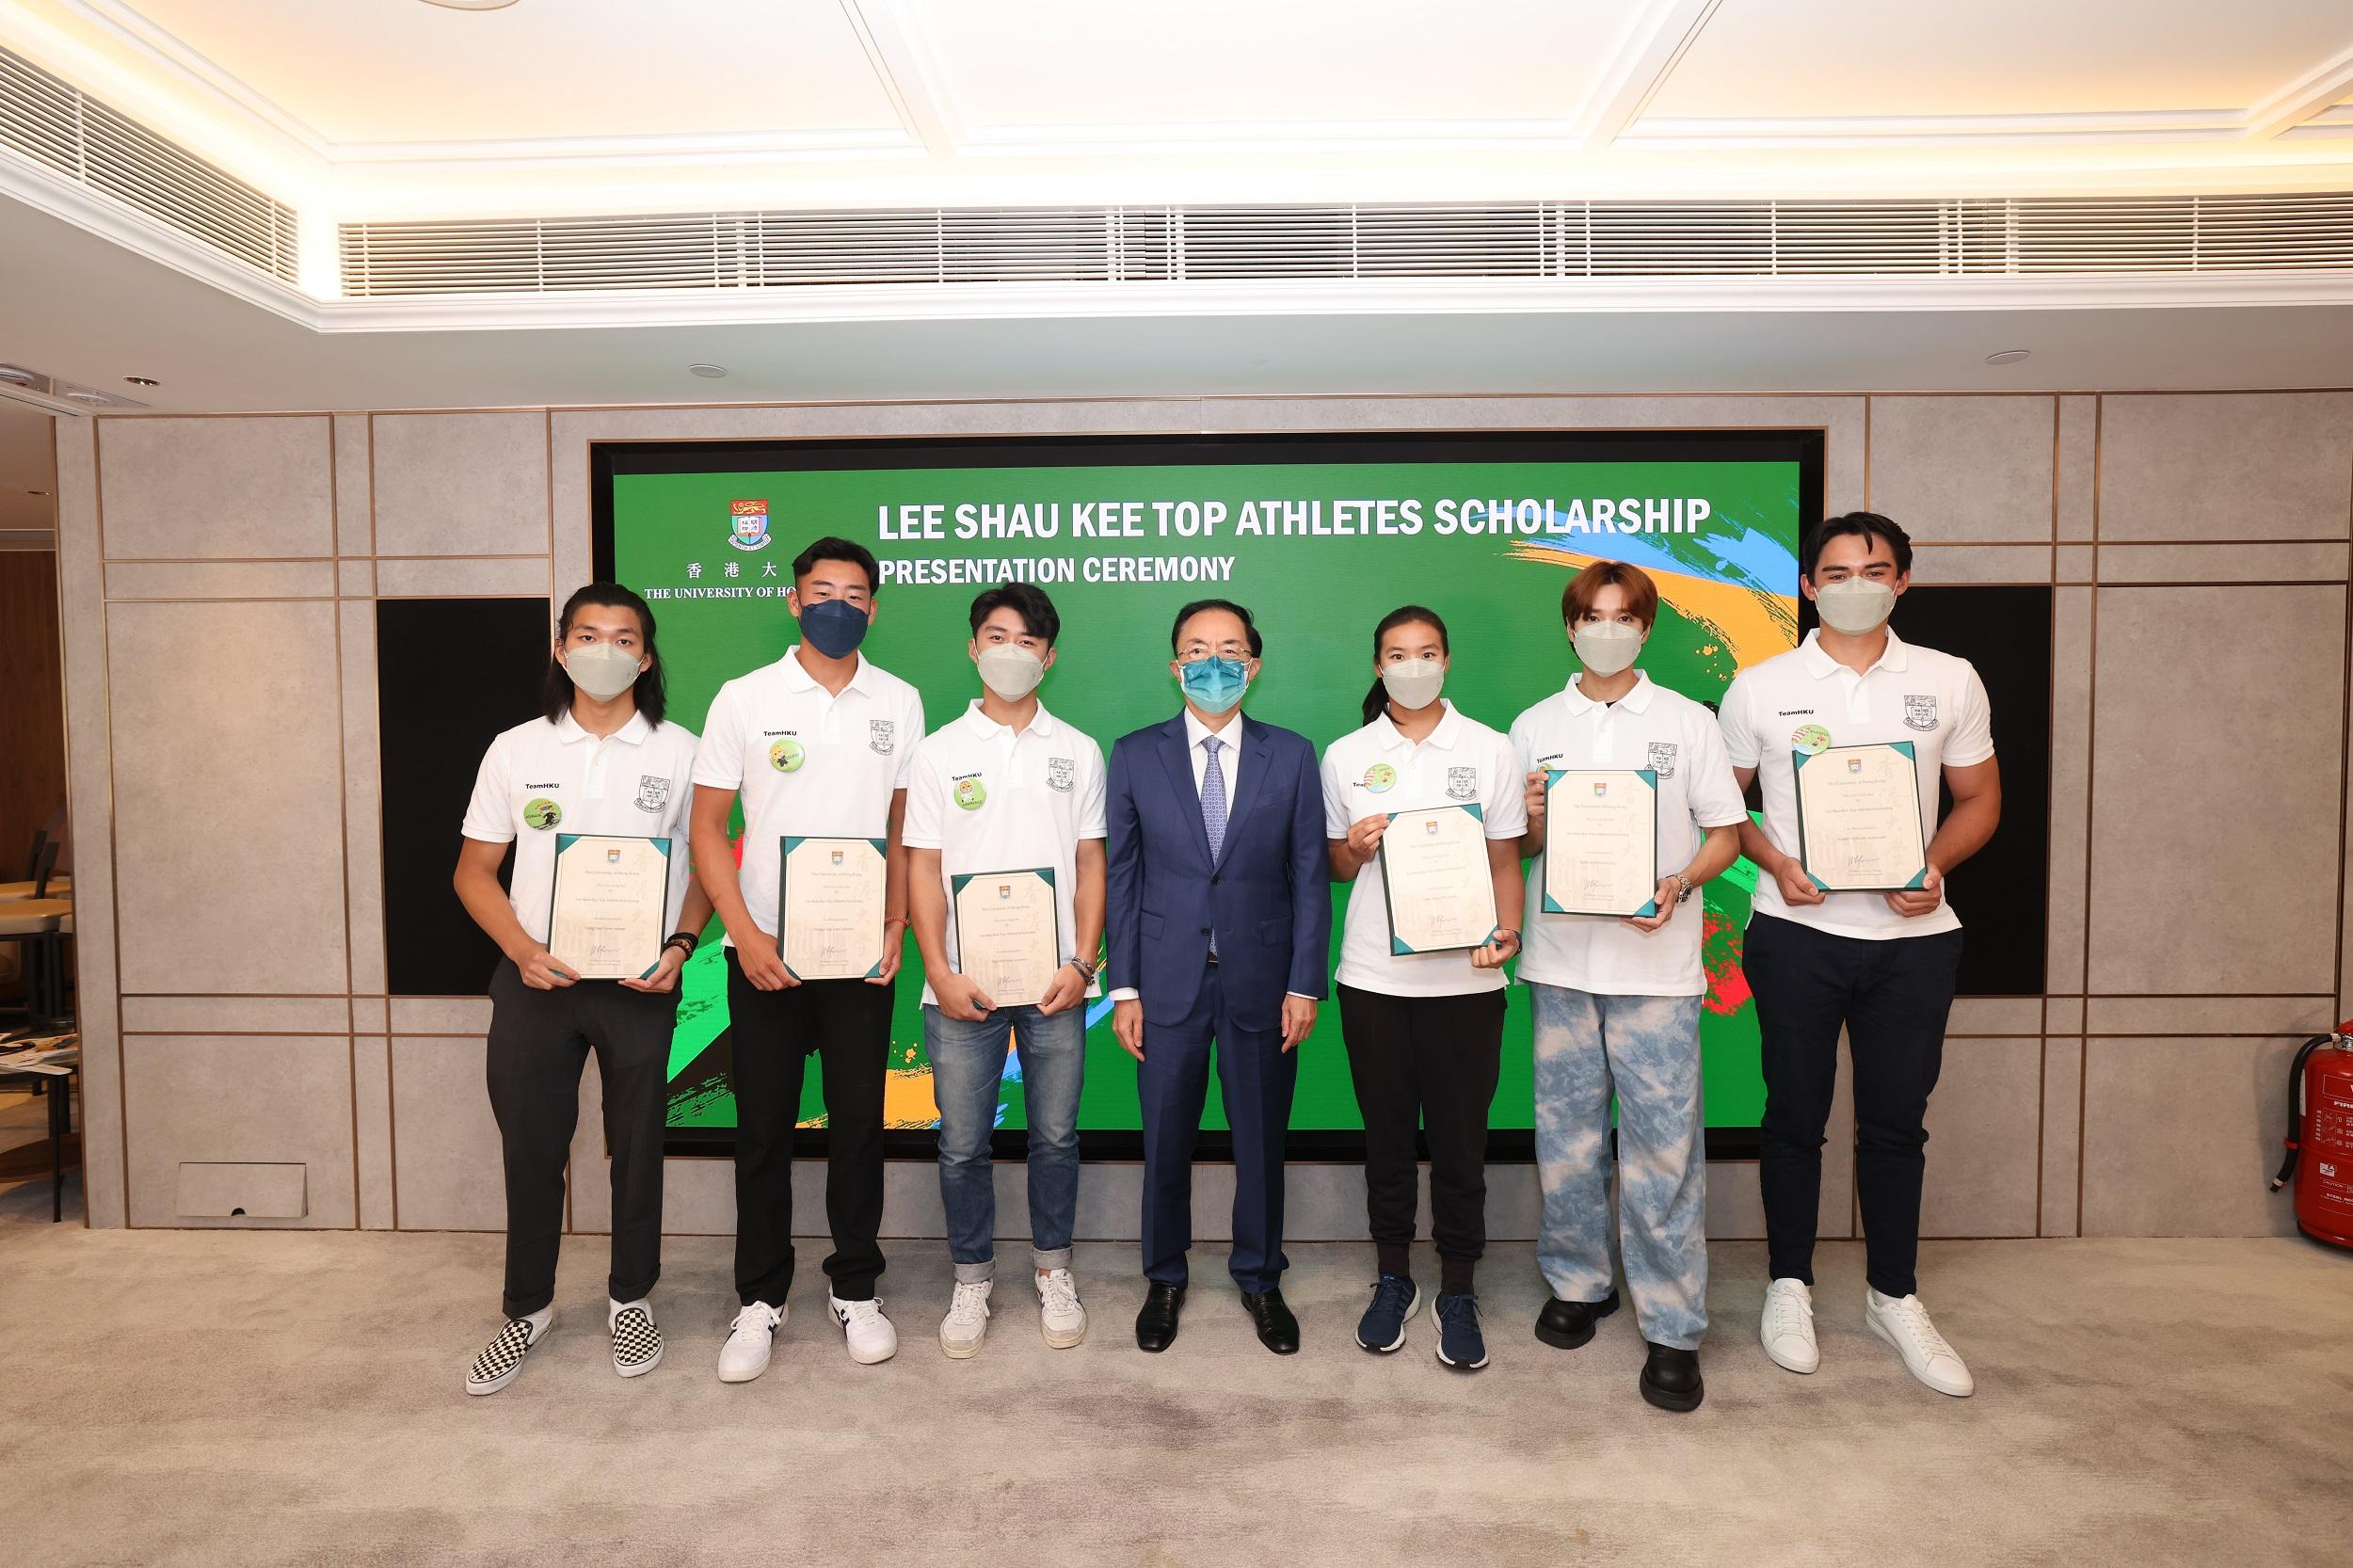 (From the left) Adrian Yung, Coleman Wong, Lawrence Ng, Vice Chairman of Henderson Land Group Dr Colin Lam, Sandy Choi, Nicholas Choi and Russell Williams Aylsworth.